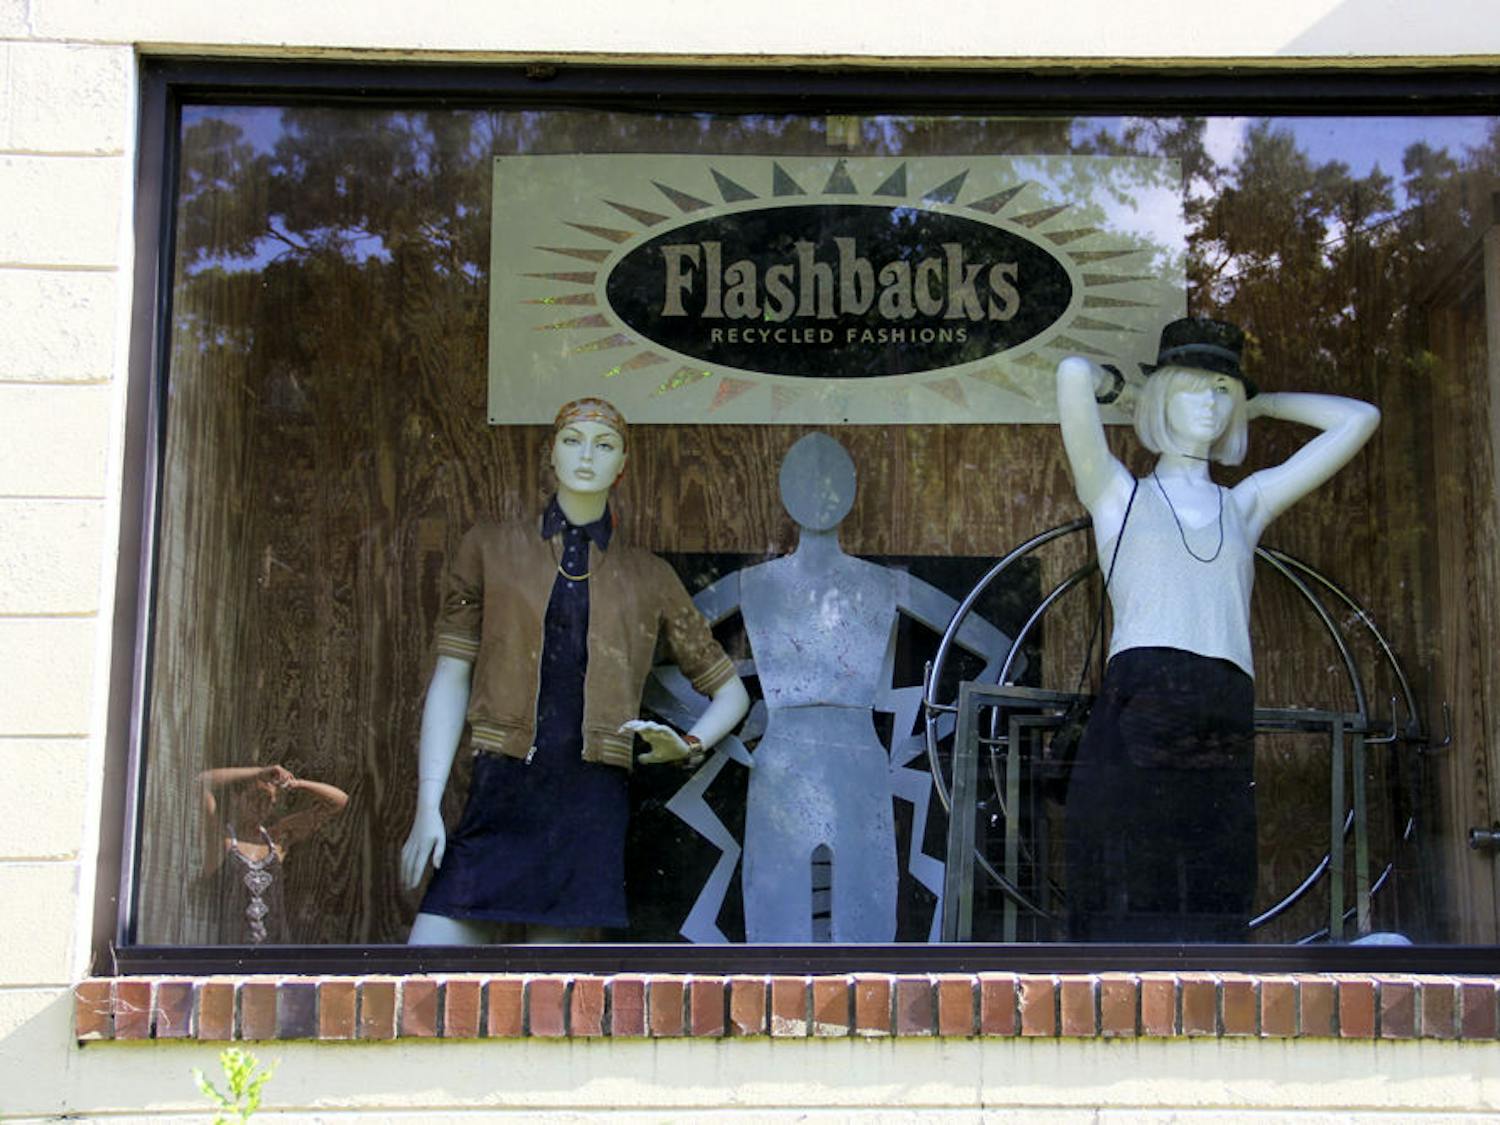 Flashbacks Recycled Fashions, 509 NW 10th Ave., may look rugged on the outside, but it is packed with fashionable second-hand clothes within.